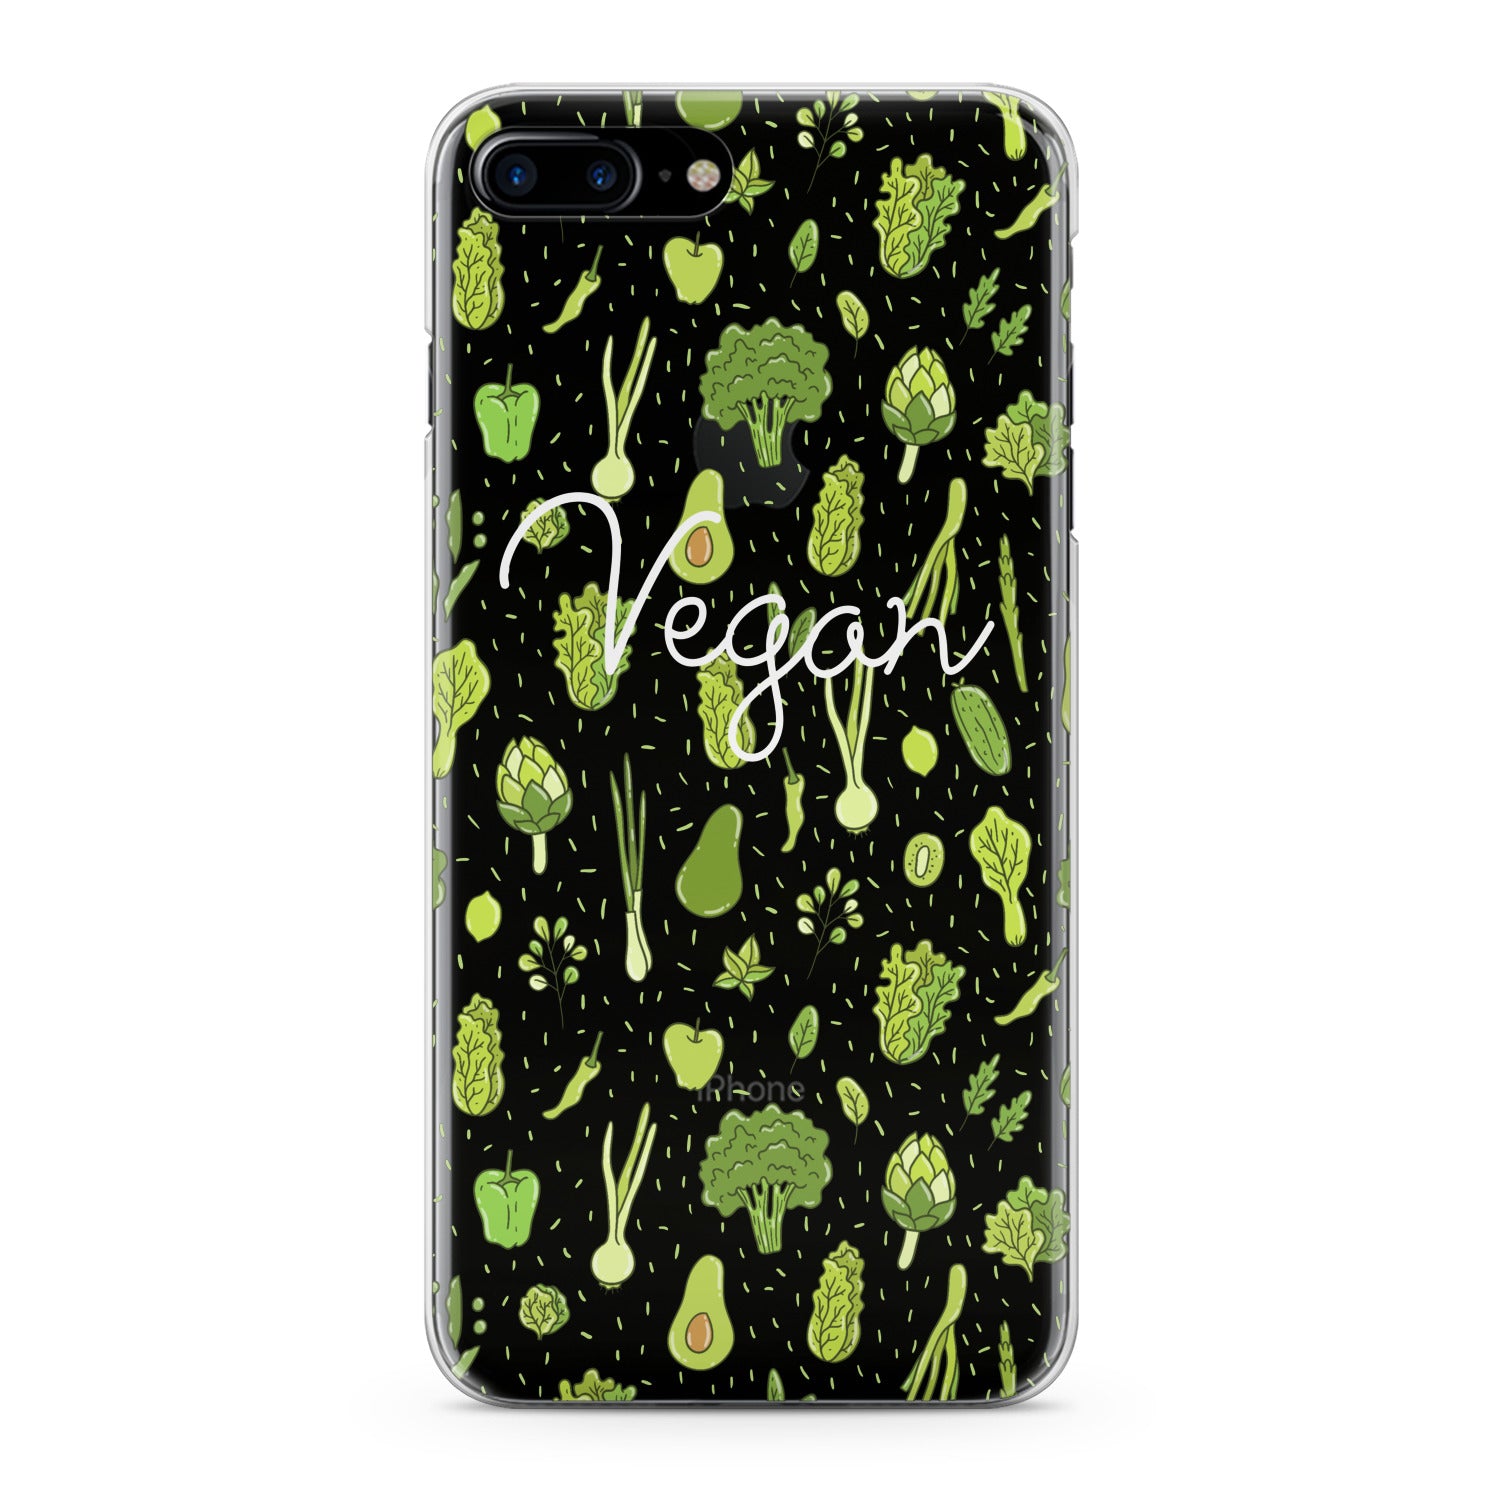 Lex Altern Green Veggie Vegs Phone Case for your iPhone & Android phone.